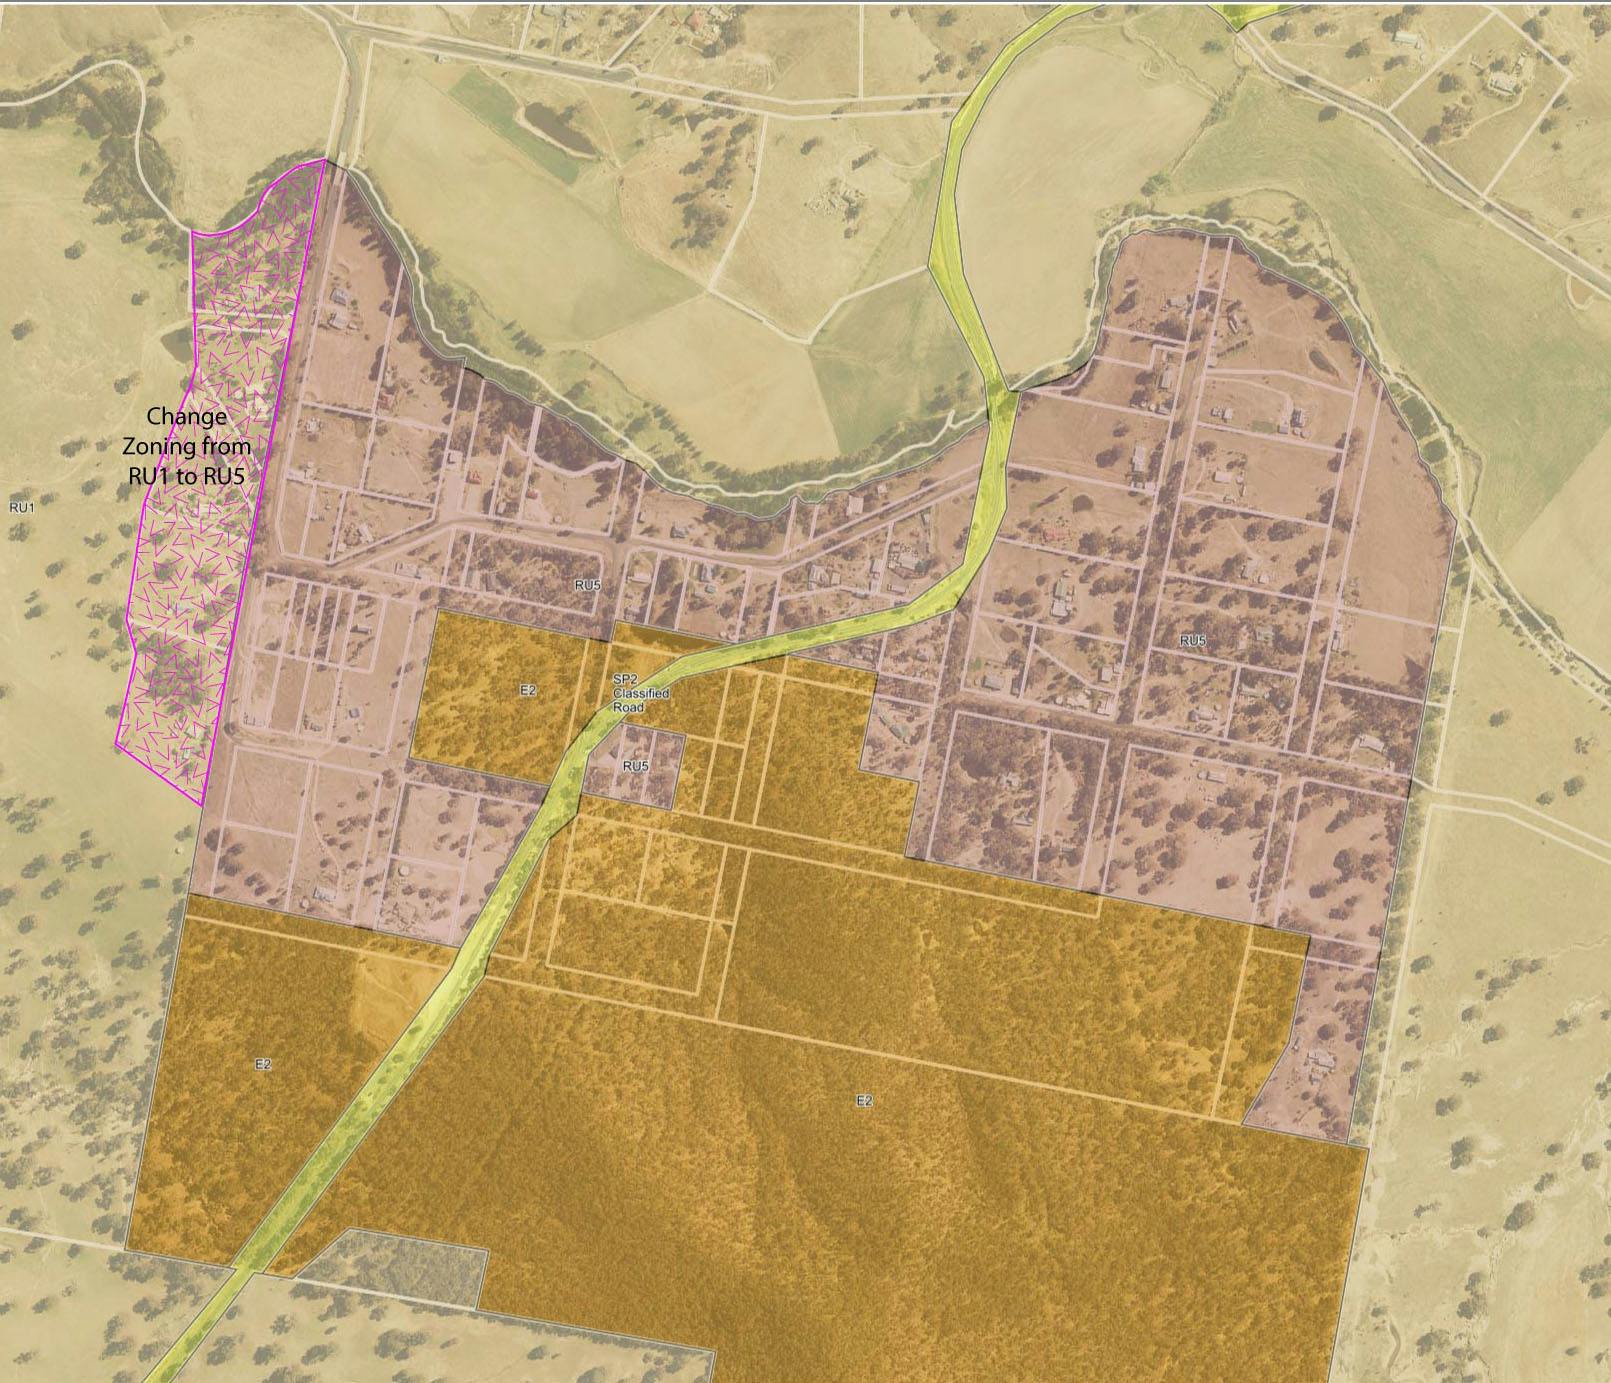 Proposed Changes to Land Use Zoning